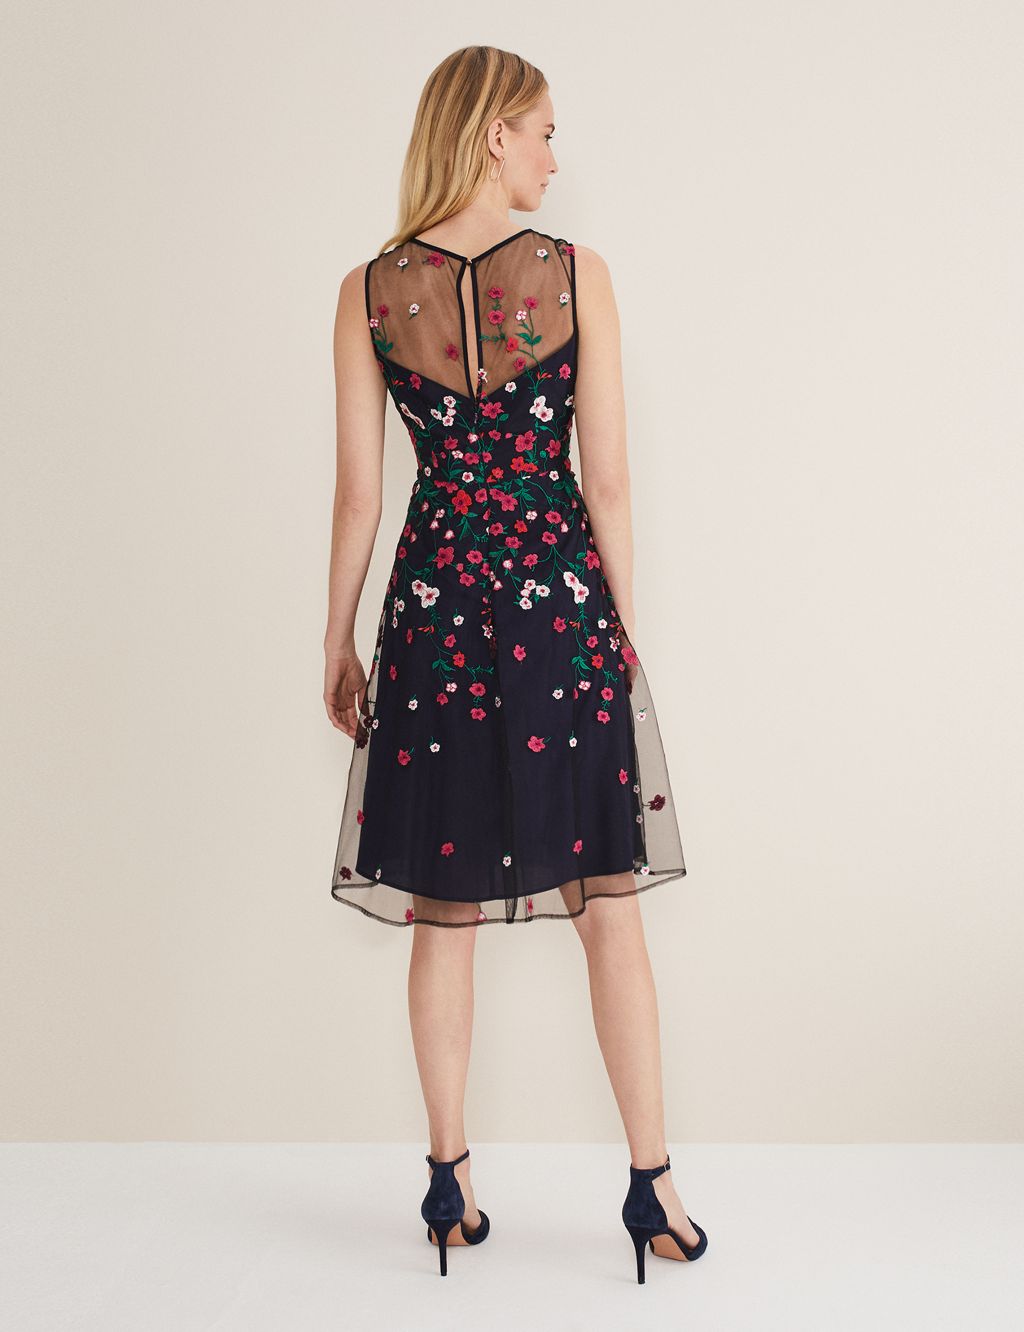 Ditsy Floral Round Neck Mini Waisted Dress image 4